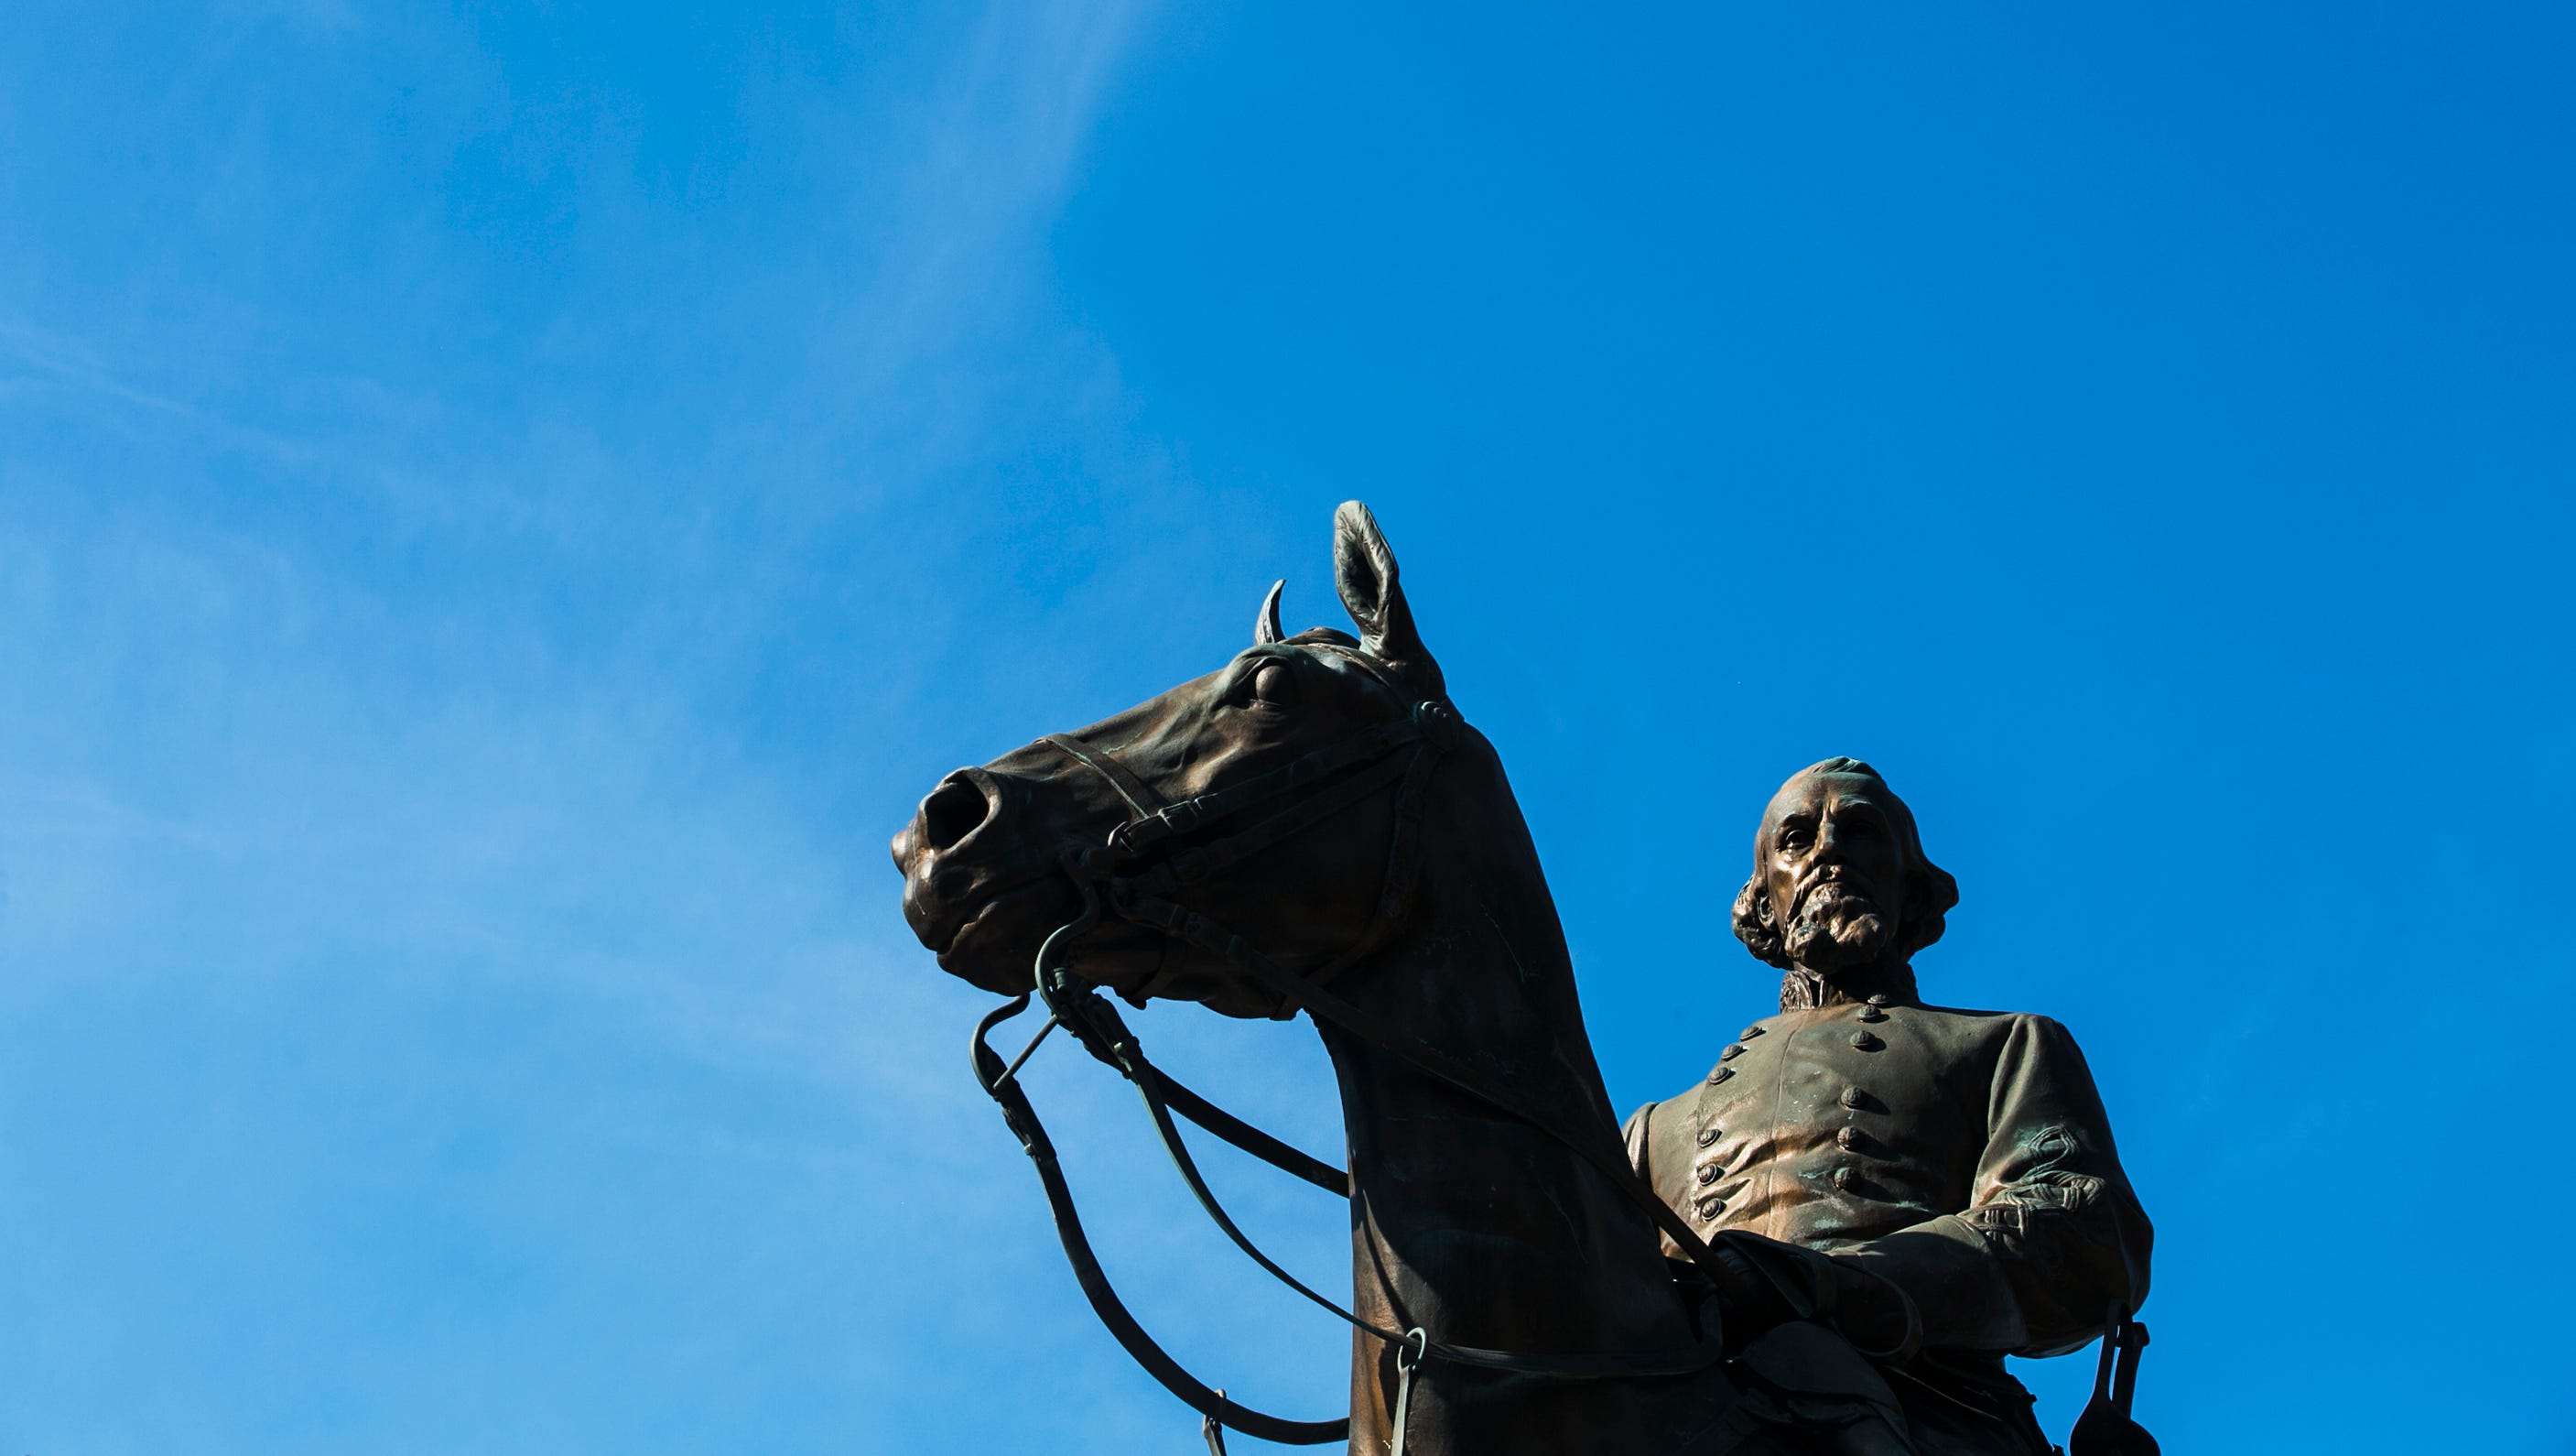 Confederate Monuments Should They Stay Or Go